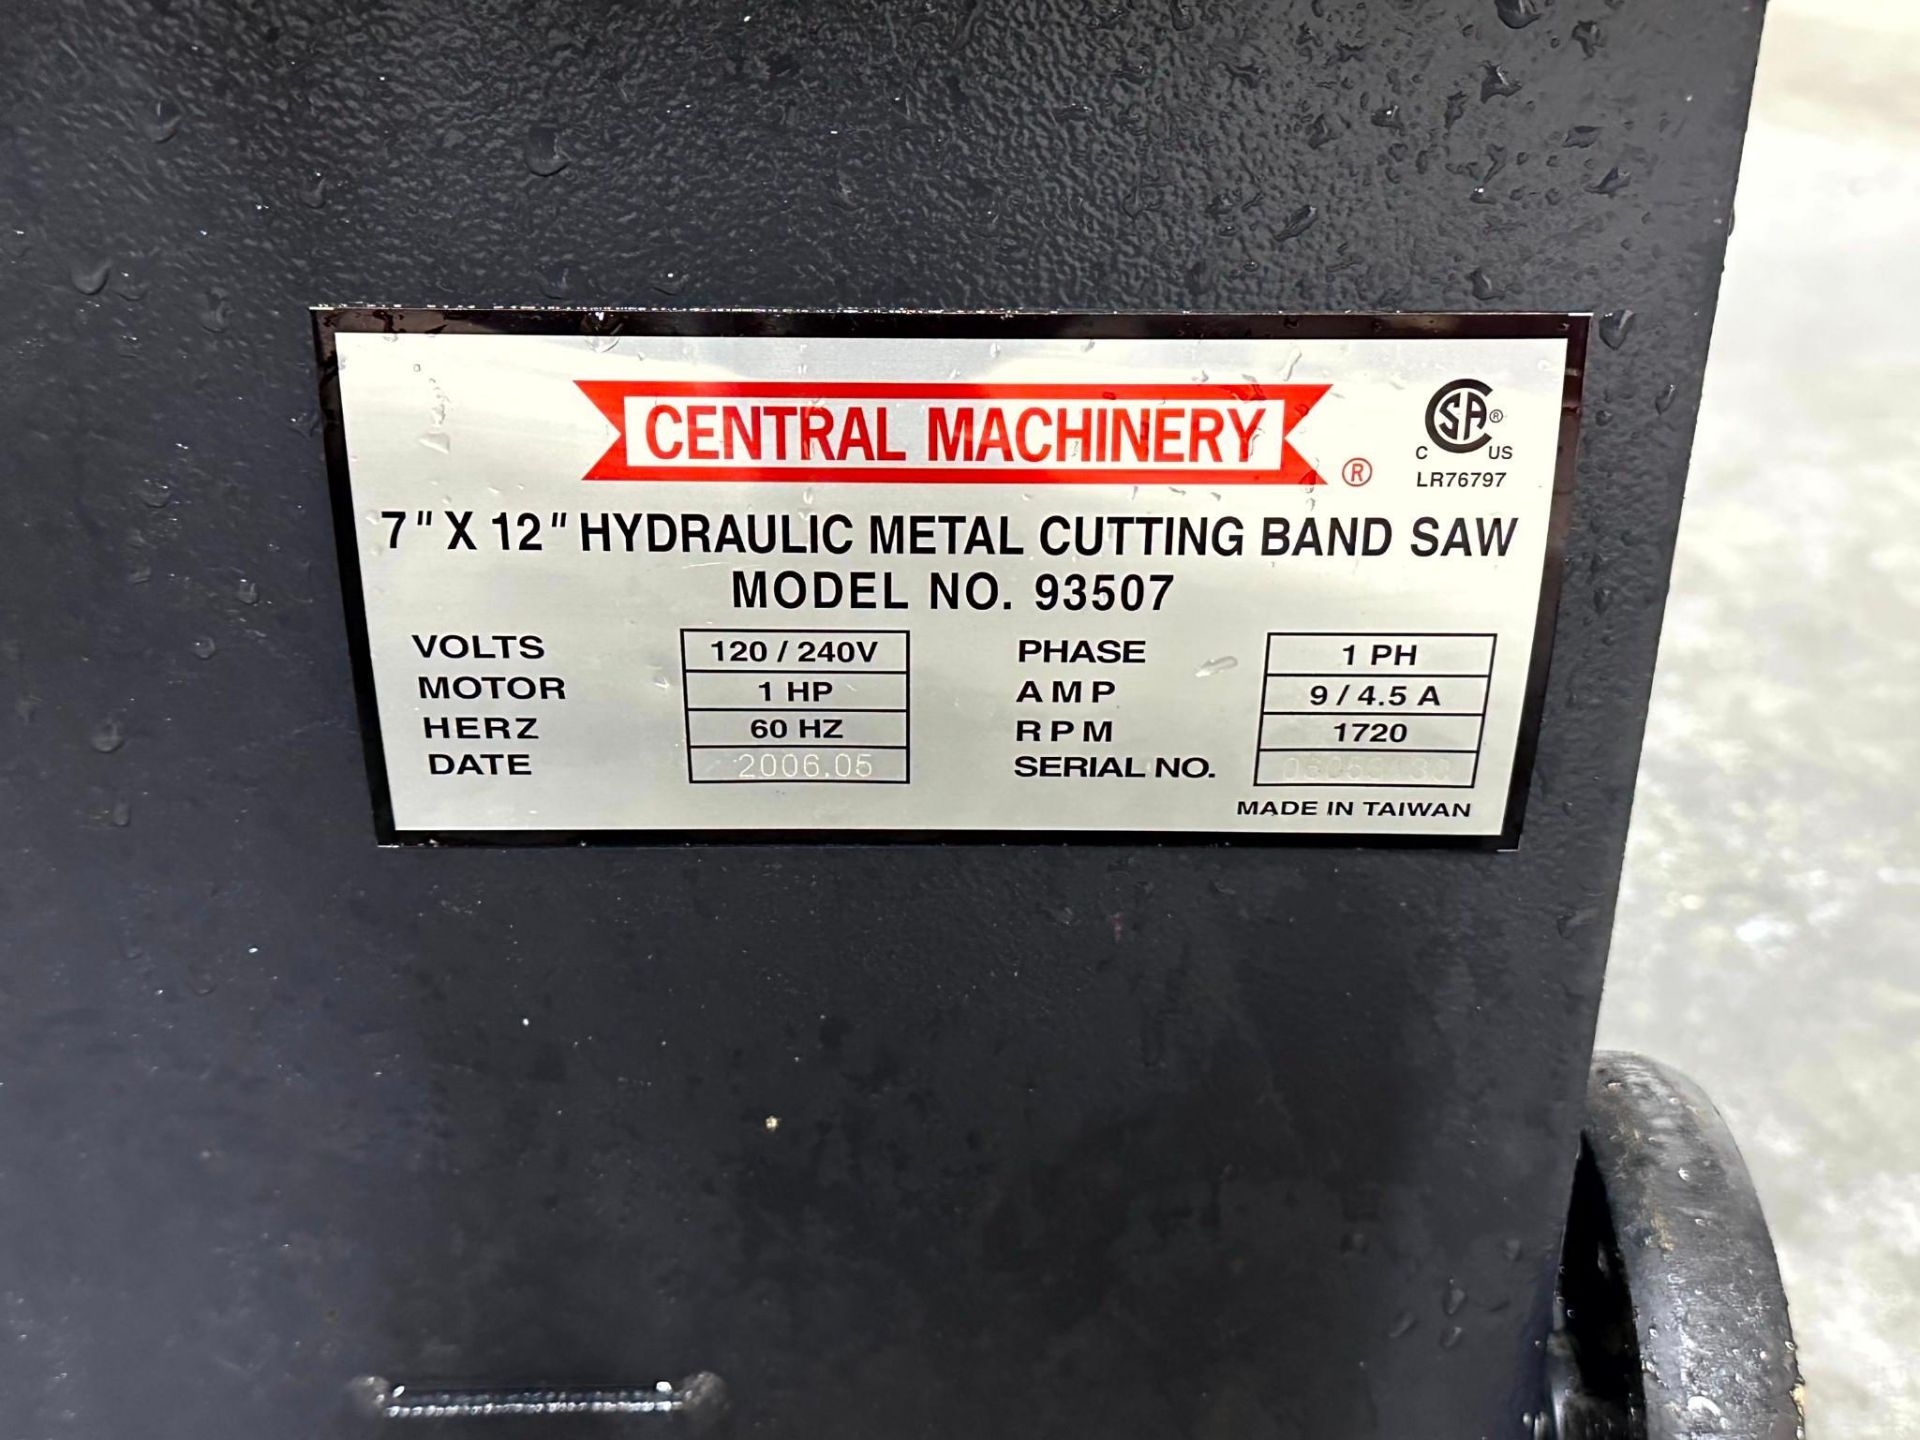 CENTRAL MACHINERY 93507 7"X12" HYDRAULIC METAL CUTTING BAND SAW - Image 5 of 5